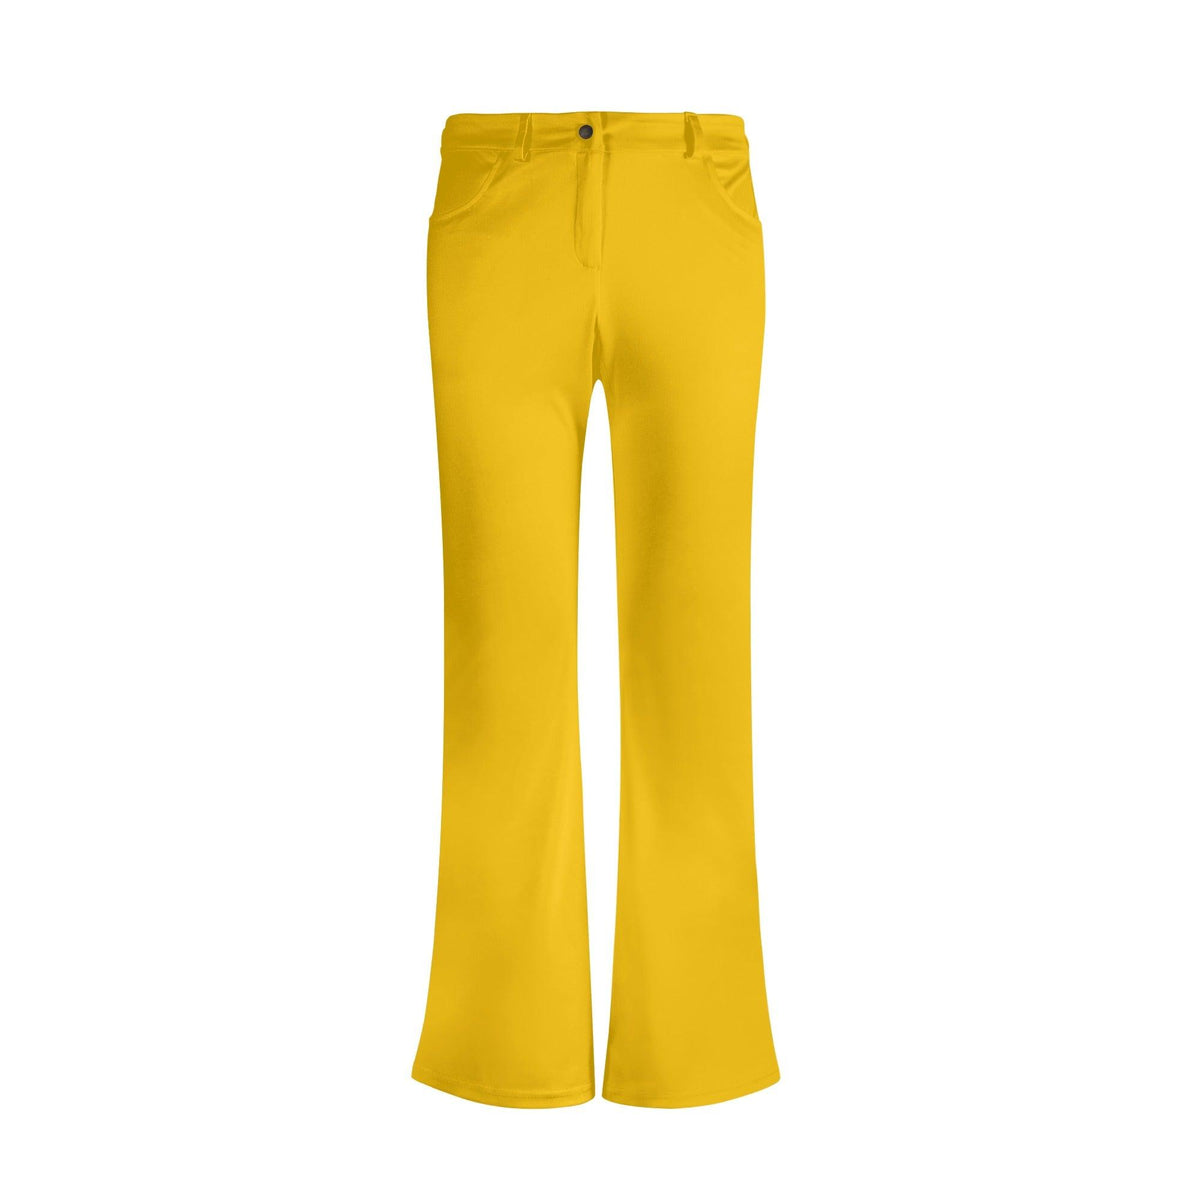 Airline Series Yellow Flare Zip Leggings Pants - Bell Bottoms Mod Retro Bright Vibrant Bold Solid Shimmery Belted Zipper Pockets Funky